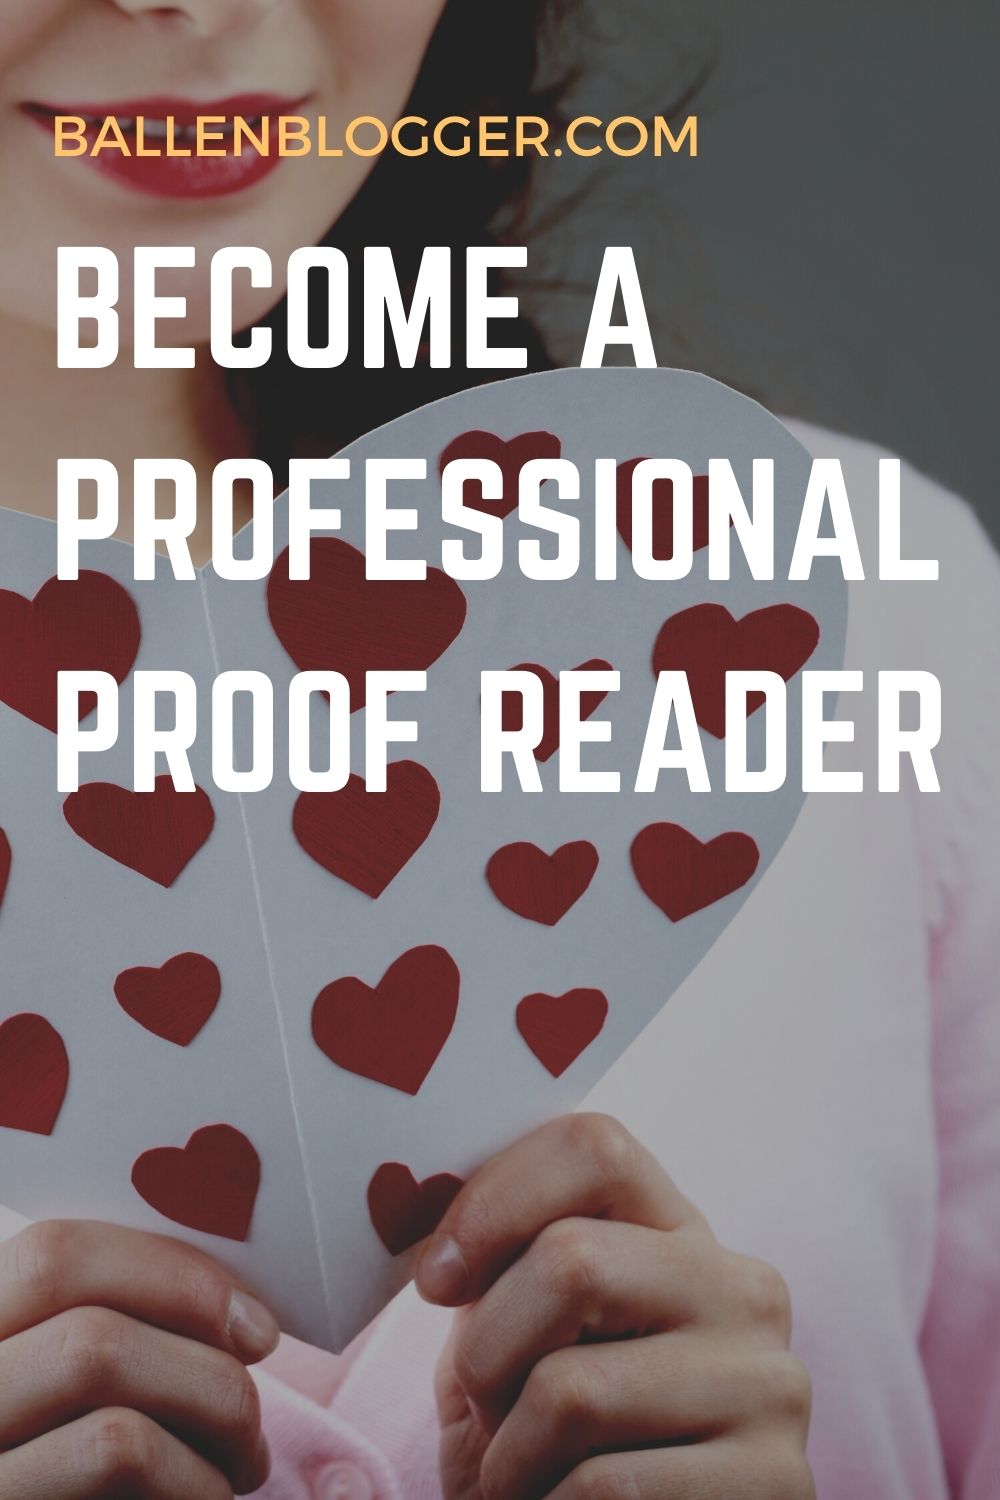 If you want to become a professional proofreader, you can take the course Proofread Anywhere. In this article, we review the Proofread Anywhere course.